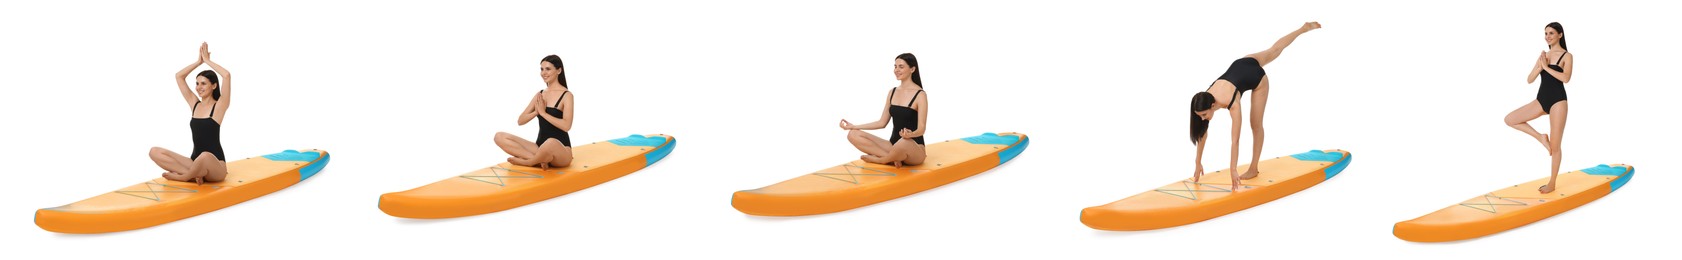 Young woman in swimsuit practicing yoga on sup board. Collage with photos on white background